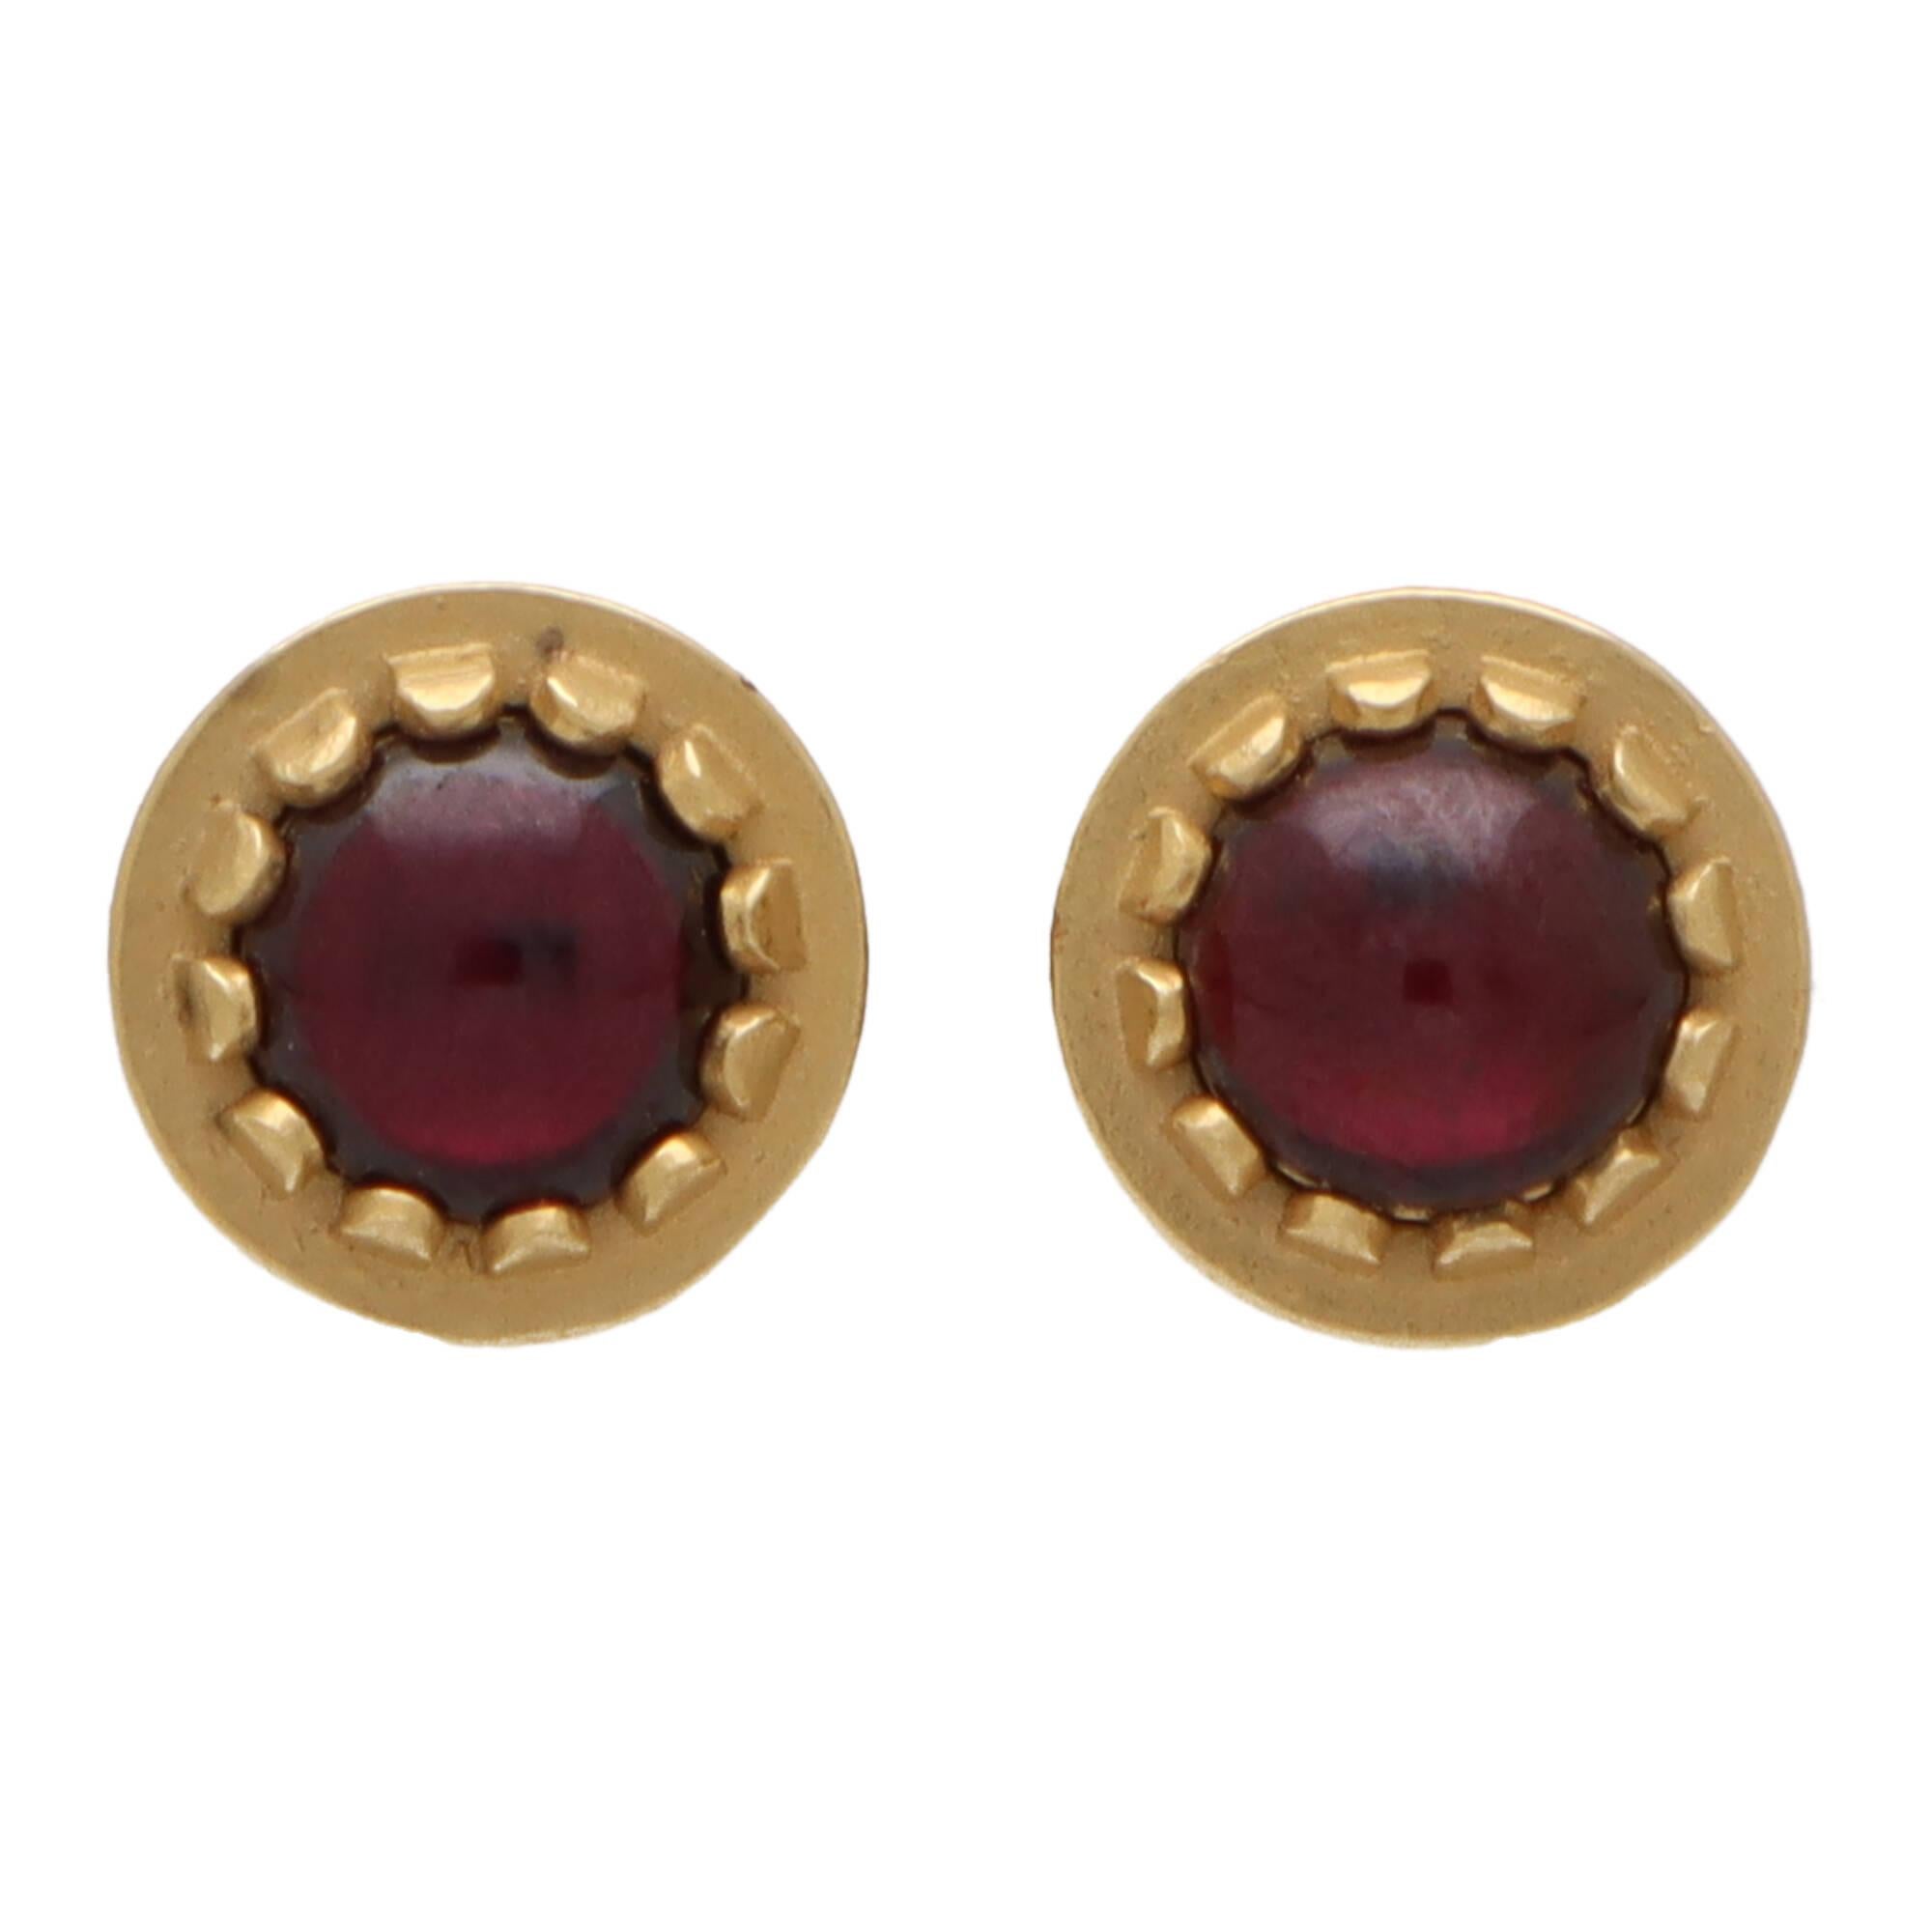  A beautiful pair of round cabochon garnet stud earrings set in 18k yellow gold.

Each earring solely features a vibrant red coloured cabochon garnet, which is claw set to centre. Each stud is secured to reverse with a post and butterfly